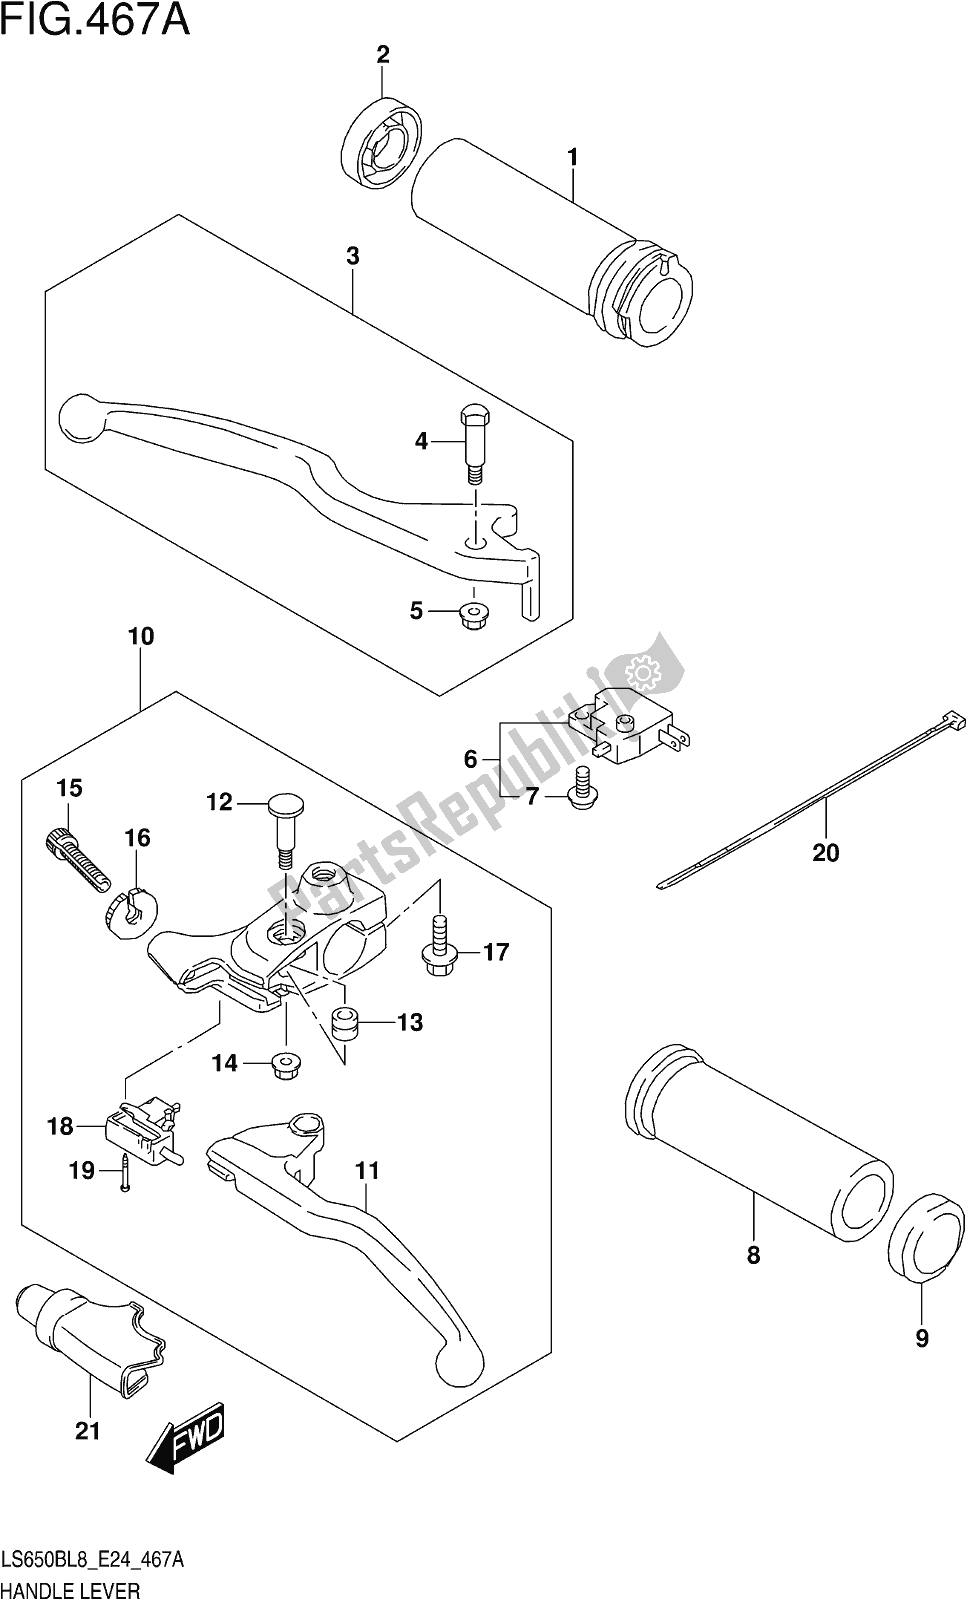 All parts for the Fig. 467a Handle Lever of the Suzuki LS 650B 2018